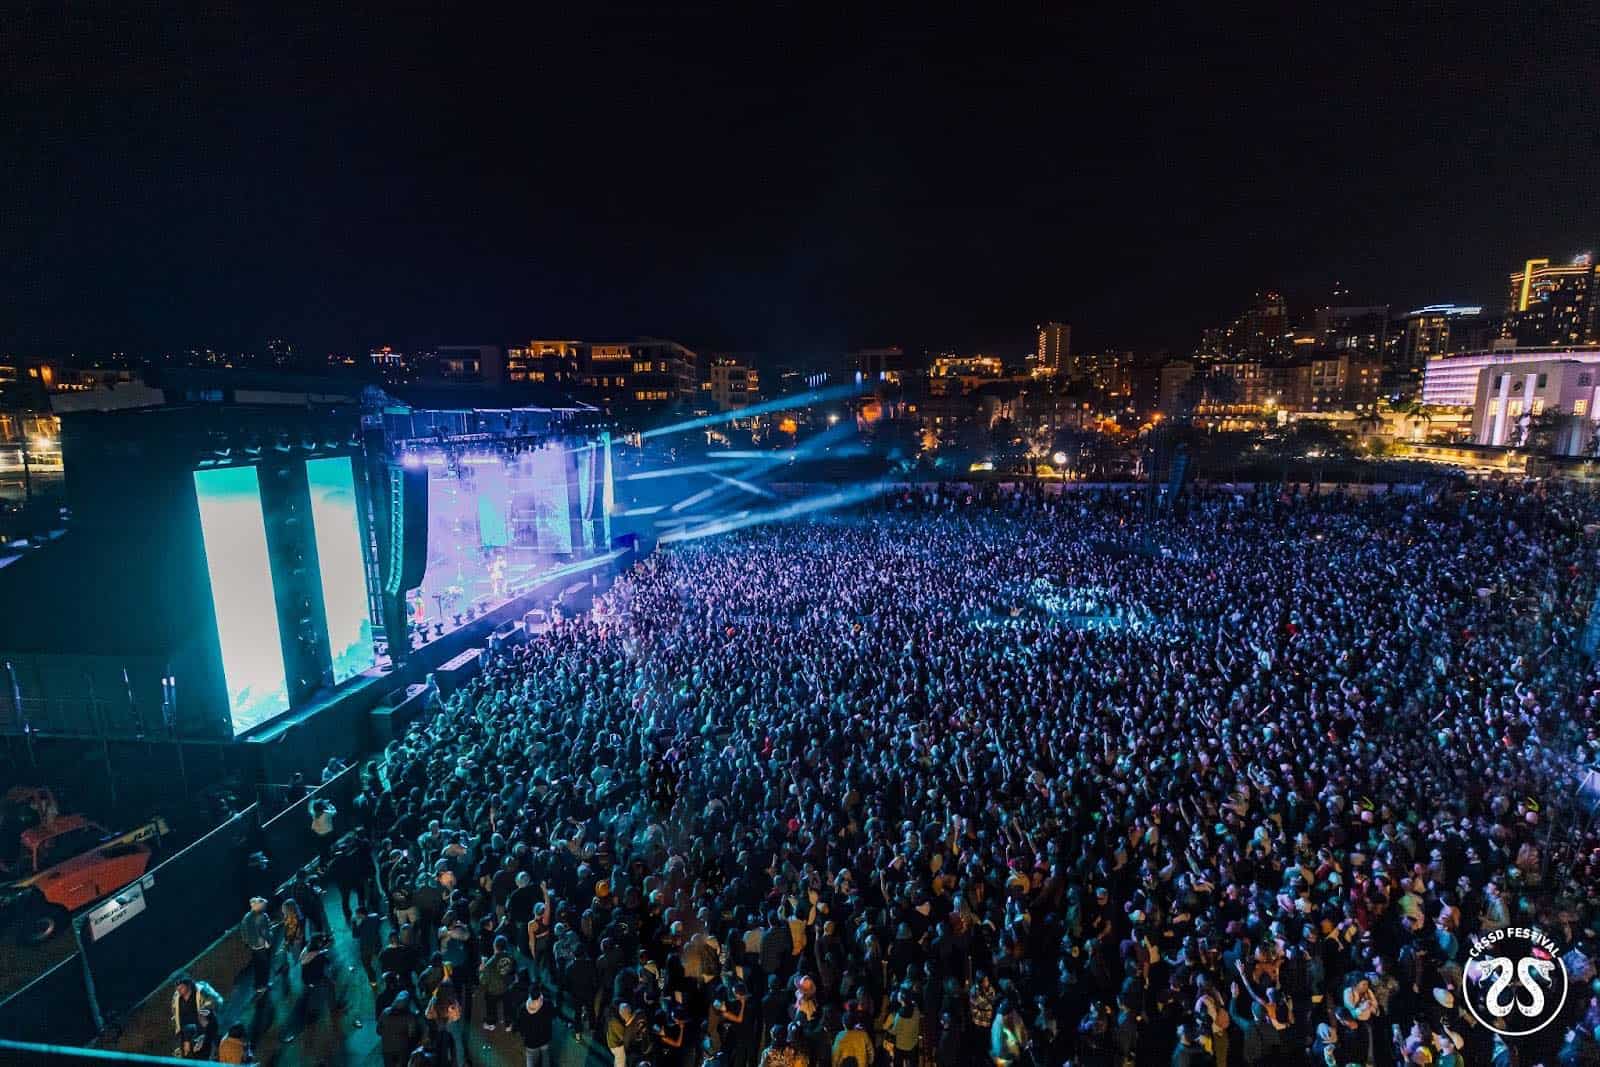 CRSSD Festival Spring returns to San Diego with stellar lineup for its 2023 edition